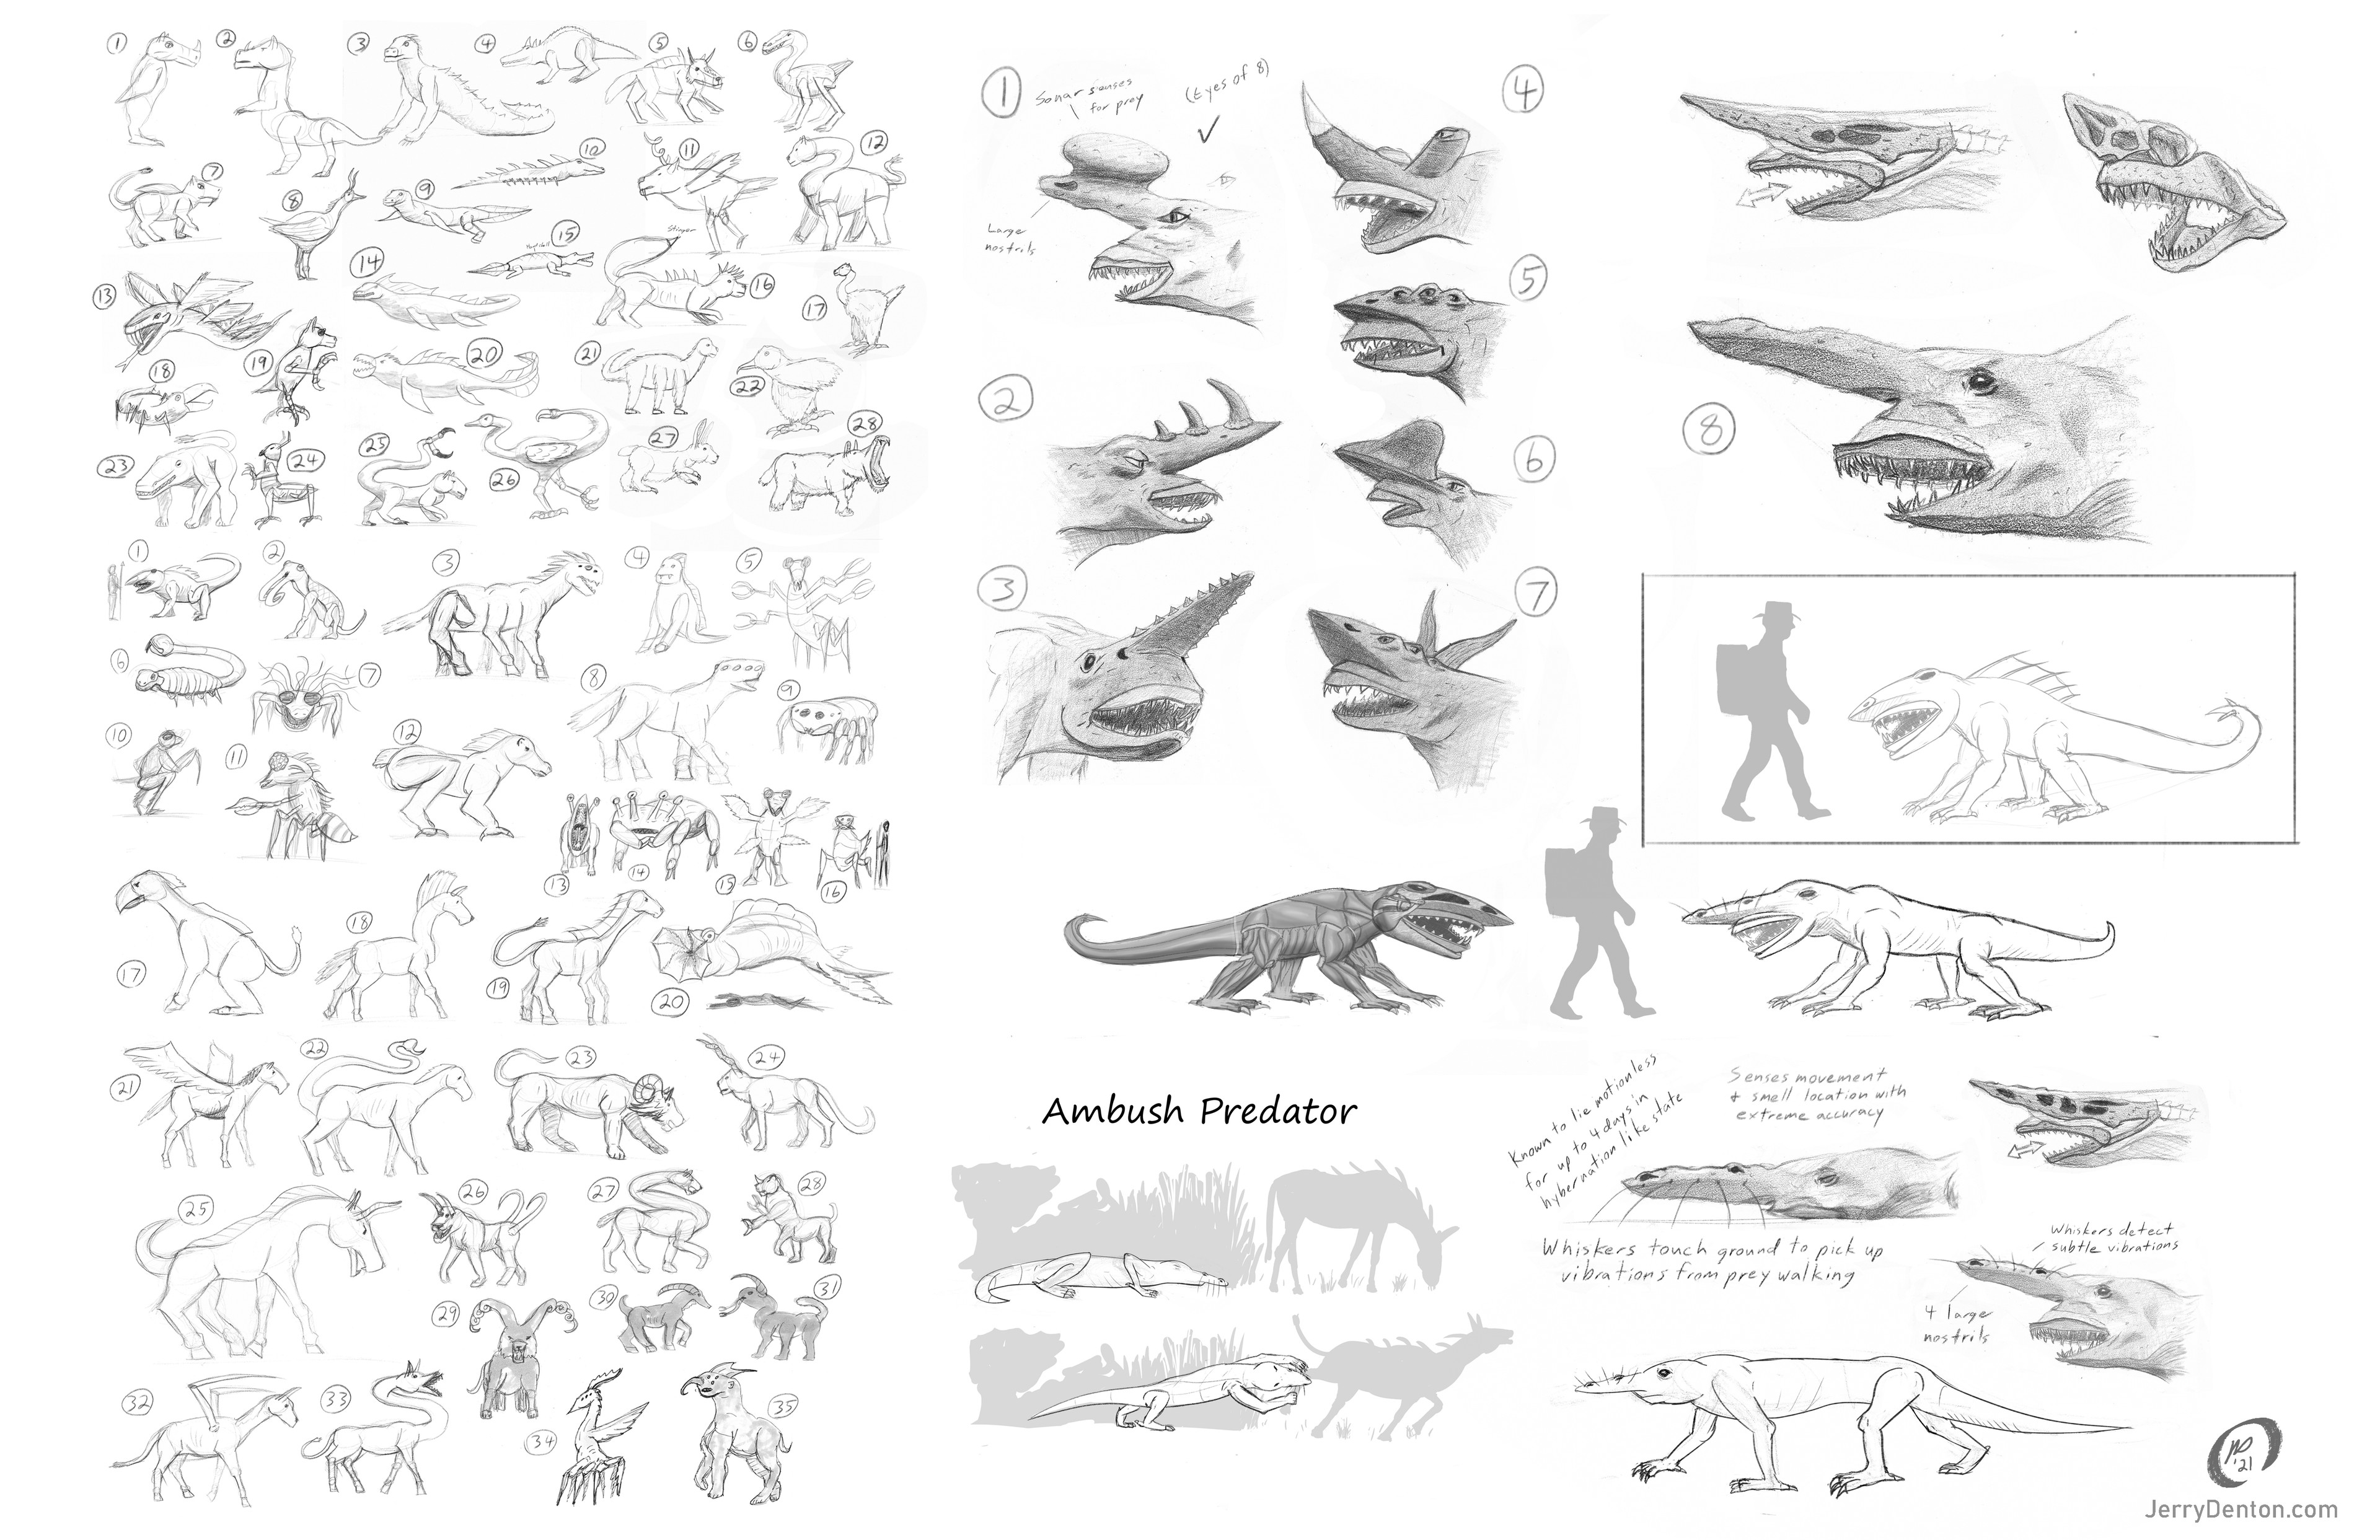 Some of the early exploration work. The design brief for this project was not very specific, so the blue sky phase was very broad and the creature gained life as we went.